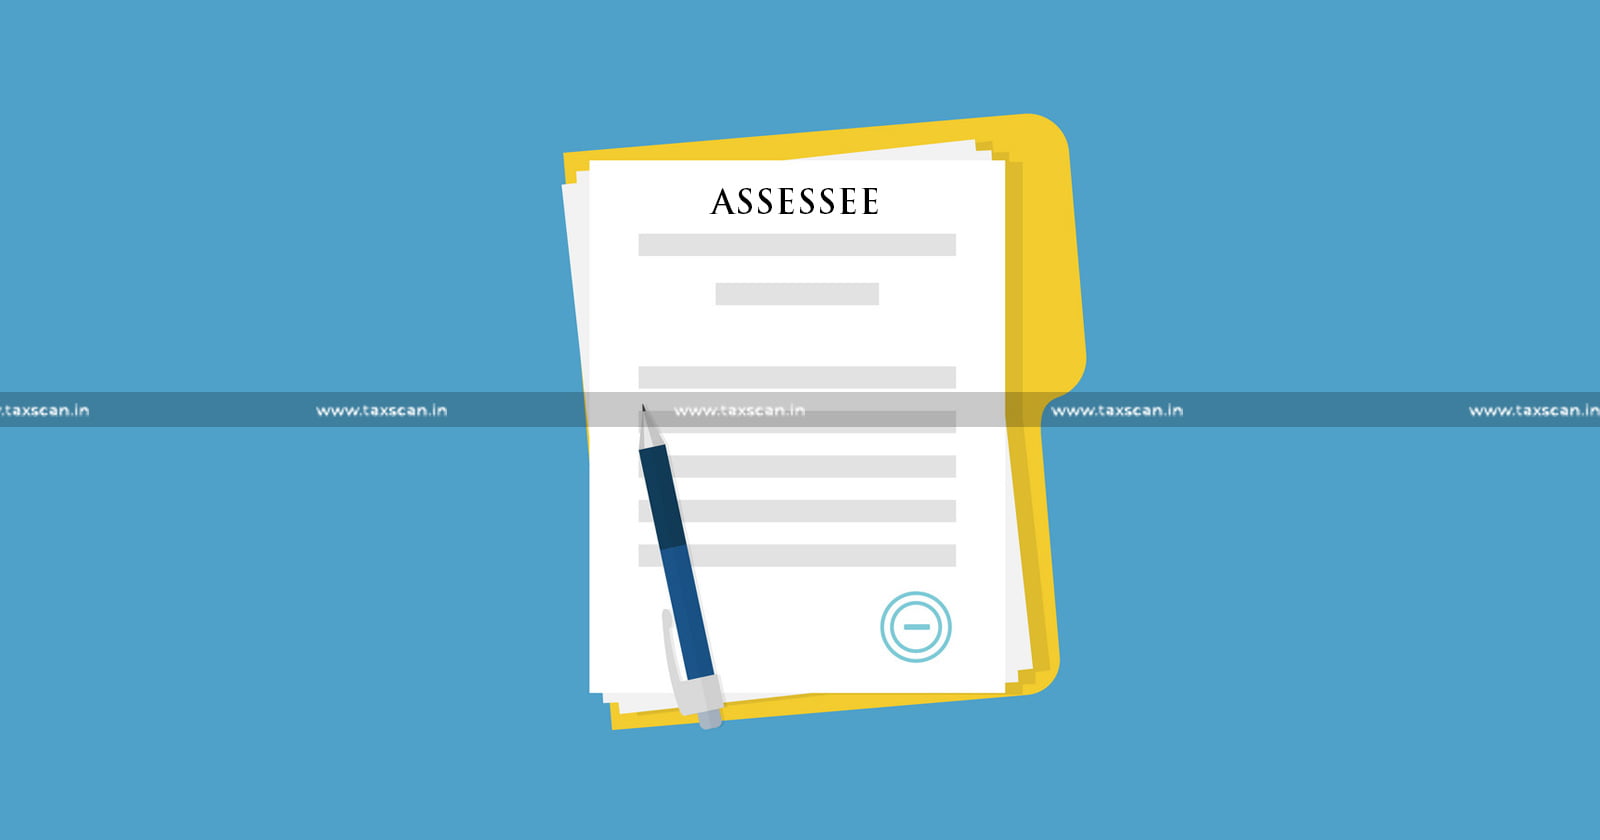 Dumb Documents - Documents - Third Party - Assessee’s Name - Assessee - Addition - ITAT - Taxscan